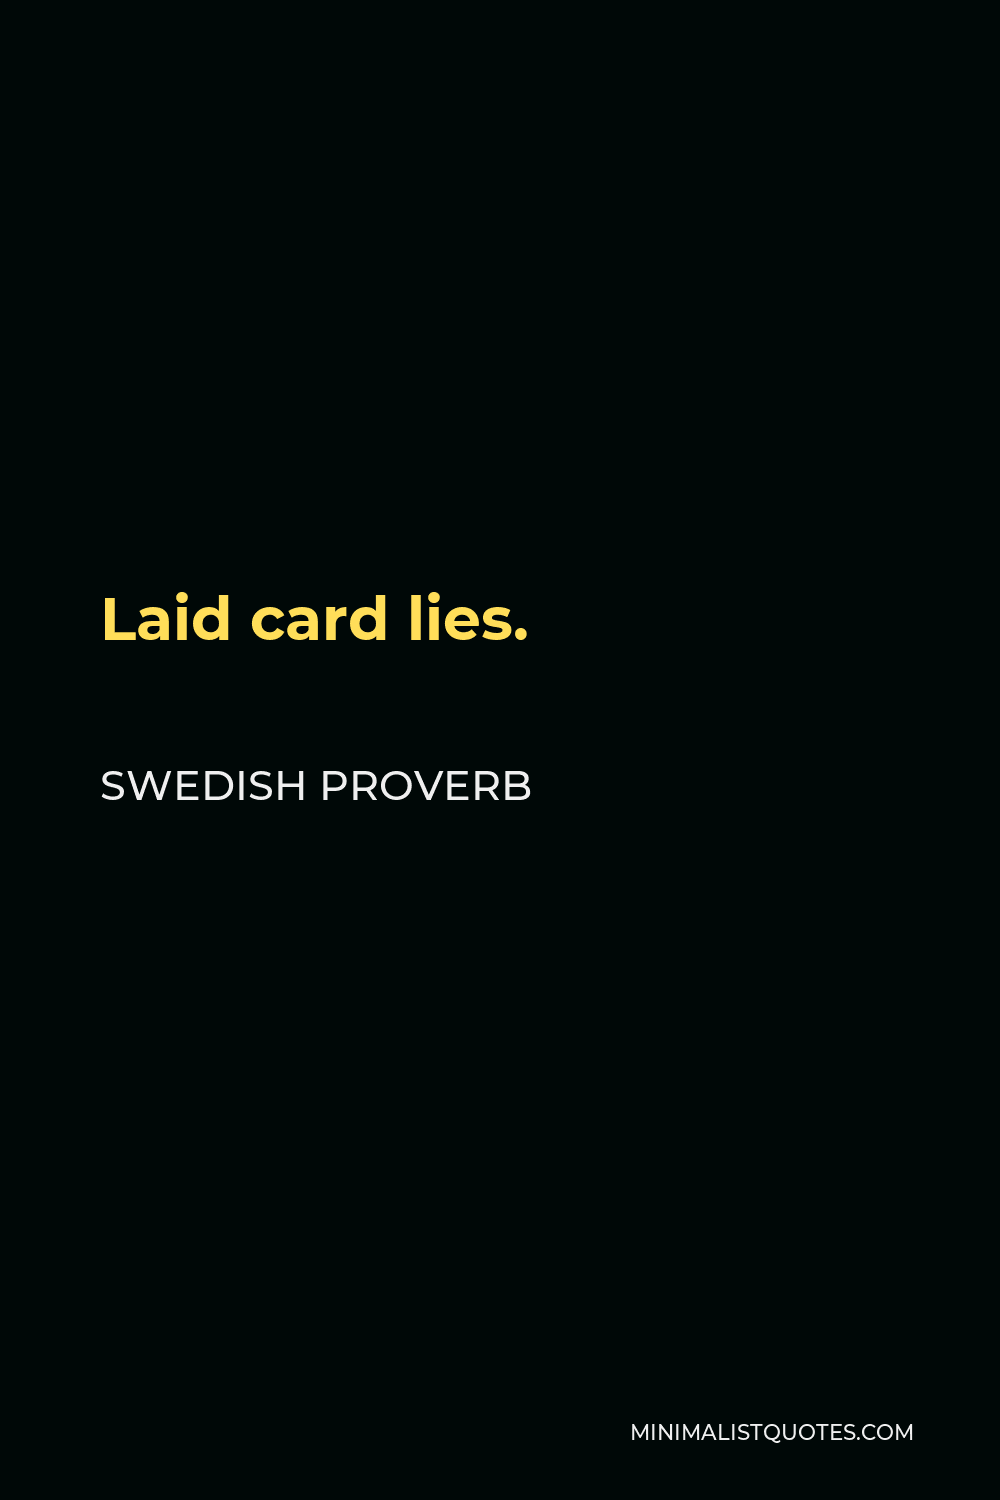 Swedish Proverb Quote - Laid card lies.